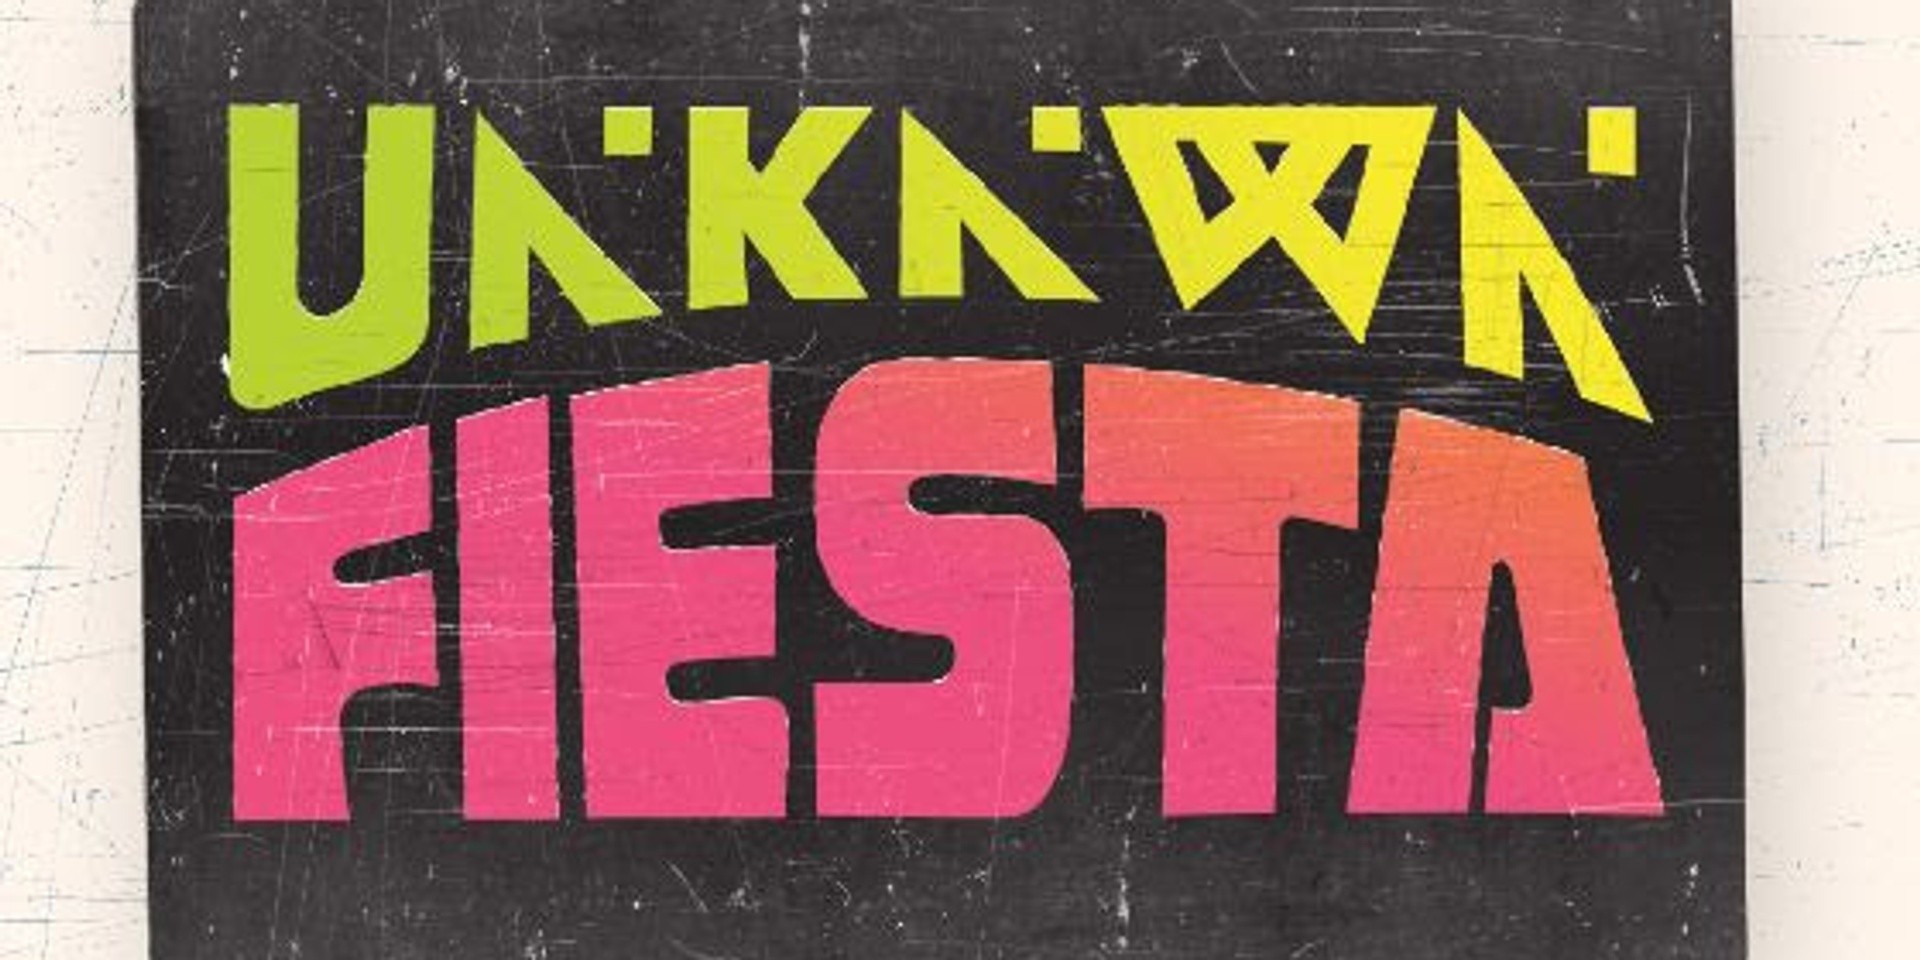 The first UNKNWN.FIESTA is coming this February 2020